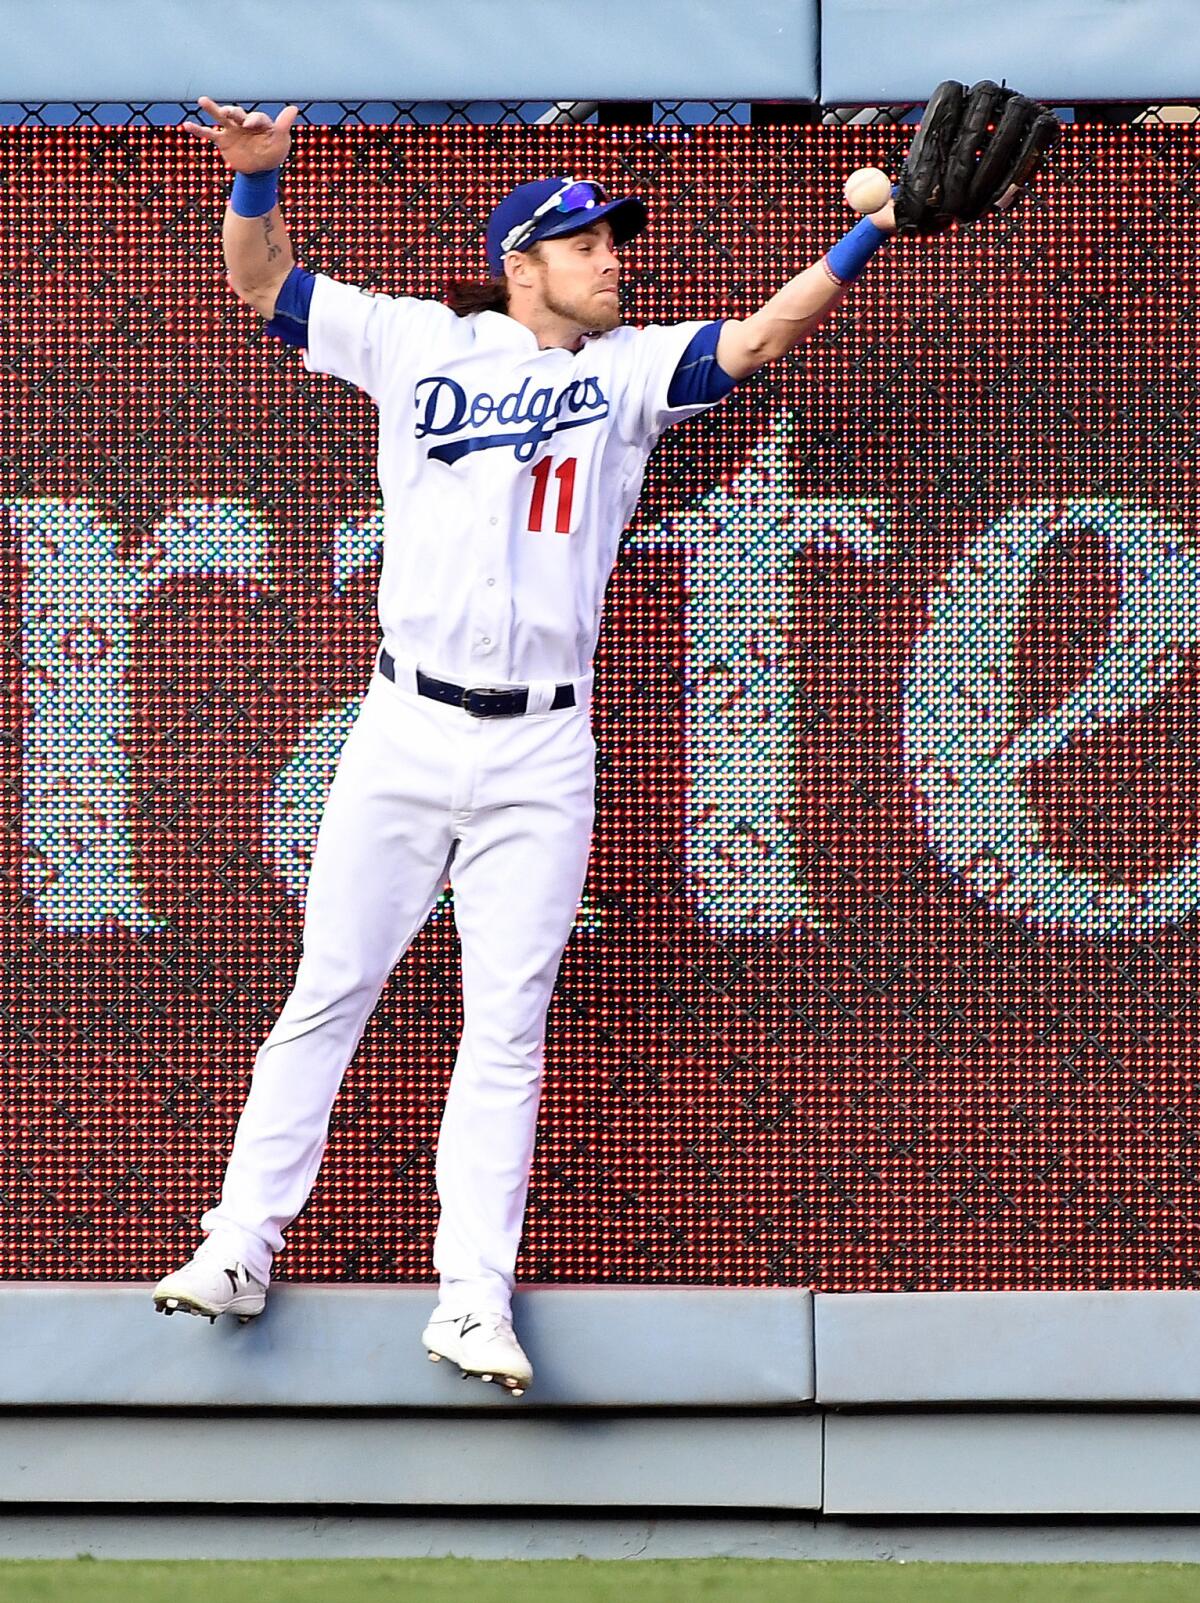 Dodgers Justin Turner celebrates after scoring in first inning against Nationals.